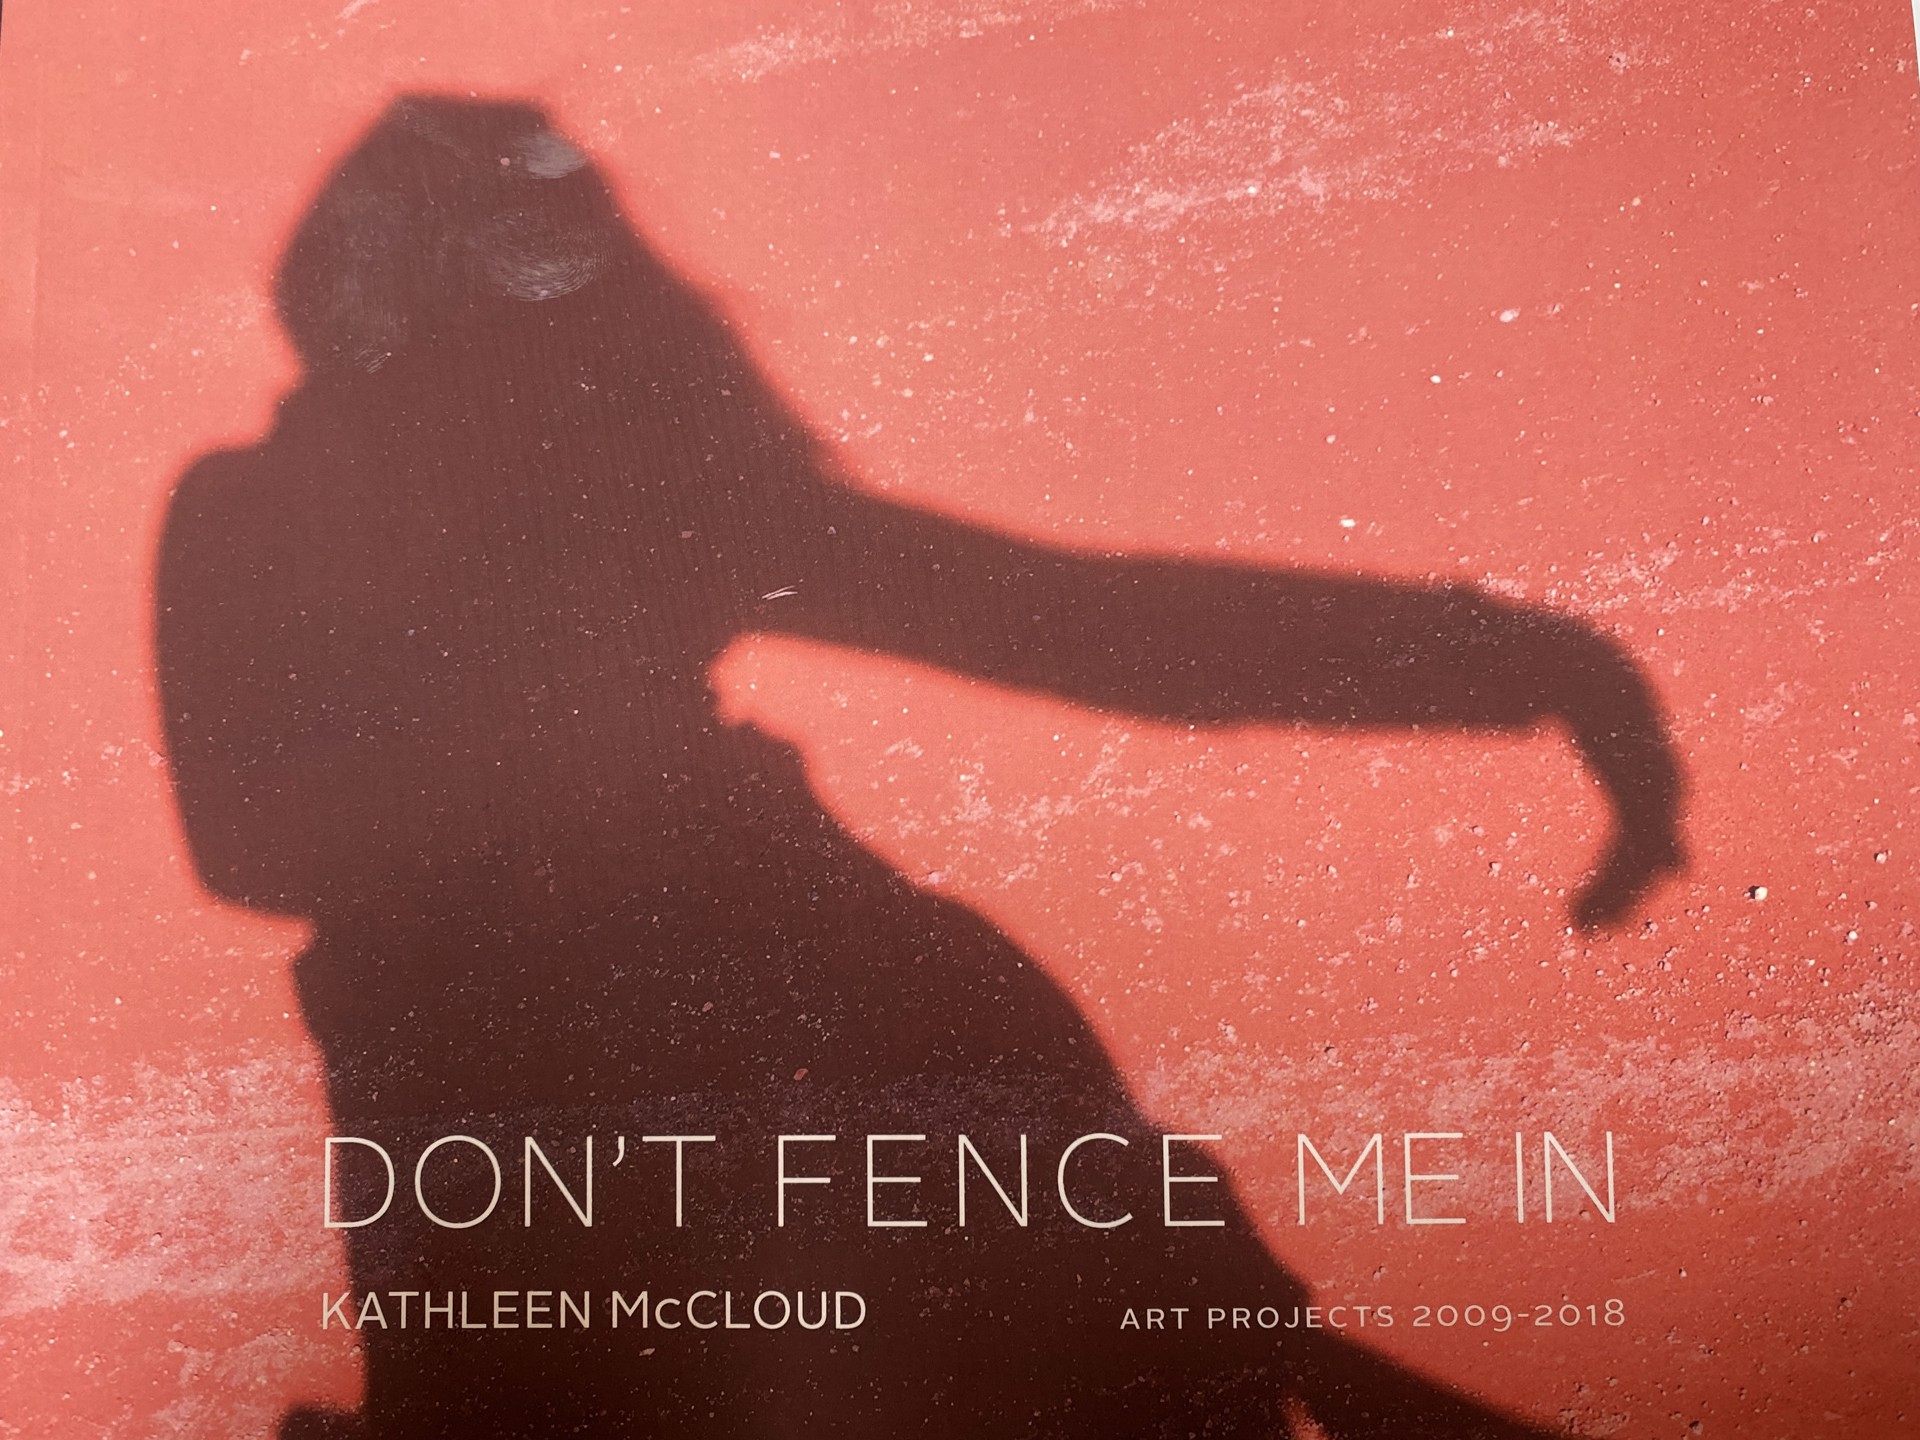 Don't fence me In by Kathleen McCloud